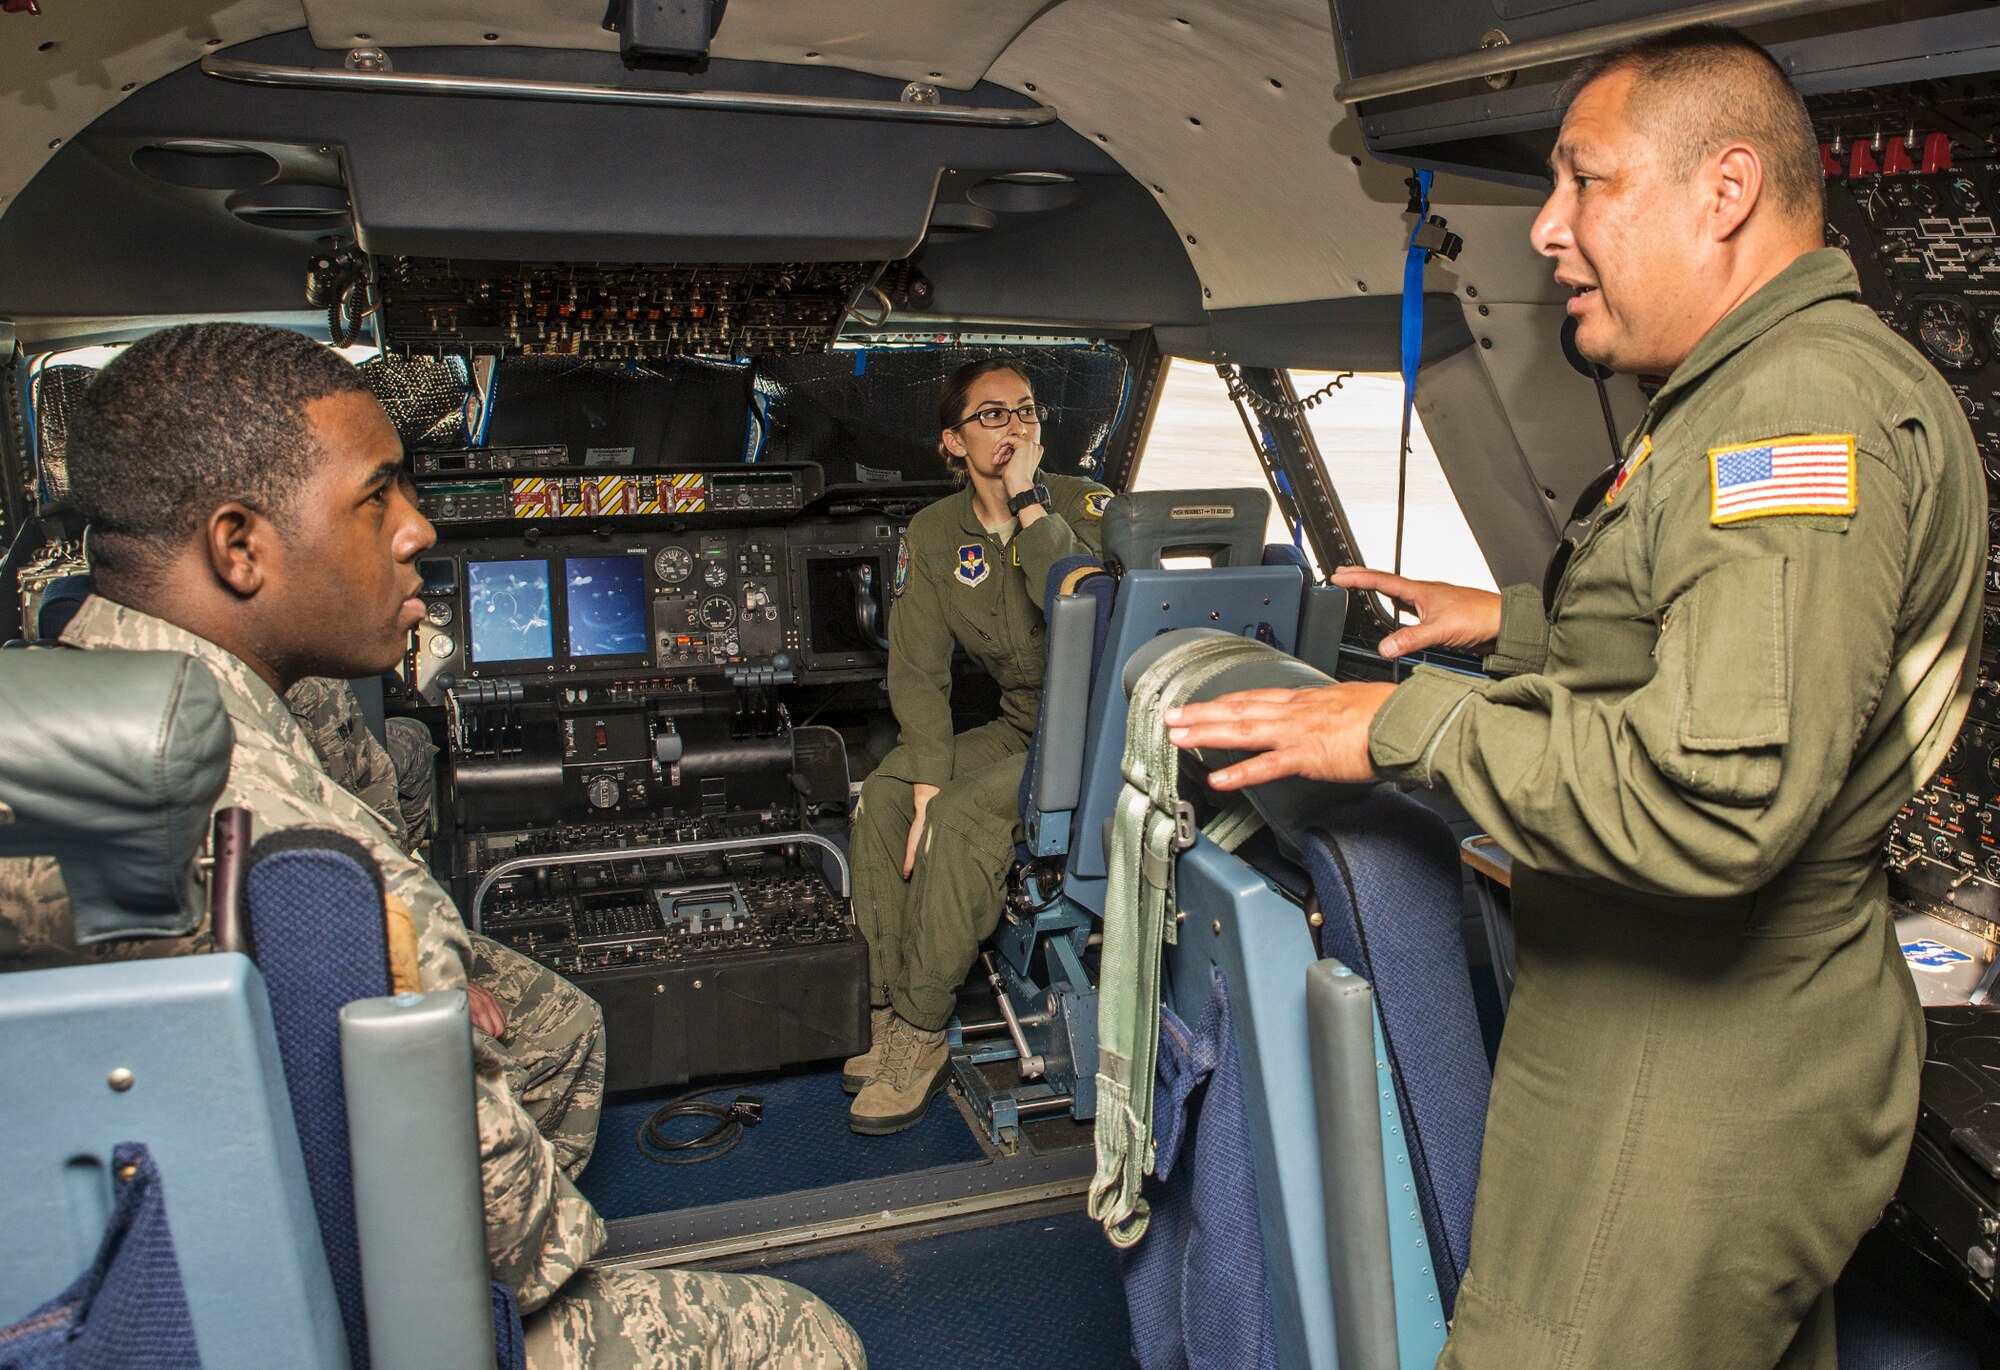 Master Sgt. Dave Delgado, 356th Airlift Squadron formal training unit instructor, explains the lift capabilities of the C-5M Super Galaxy aircraft to Airmen with the 359th Aerospace Medicine Squadron Sept. 29, 2016 at Joint Base San Antonio-Lackland, Texas. Airmen from the aerospace and operational physiology flight received a Survival Evasion Resistance and Escape briefing followed by a tour of a C-5M Super Galaxy aircraft. They were also given an aircrew flight equipment demonstration at the 433rd Operations Support Squadron.  (U.S. Air Force photo by Benjamin Faske)